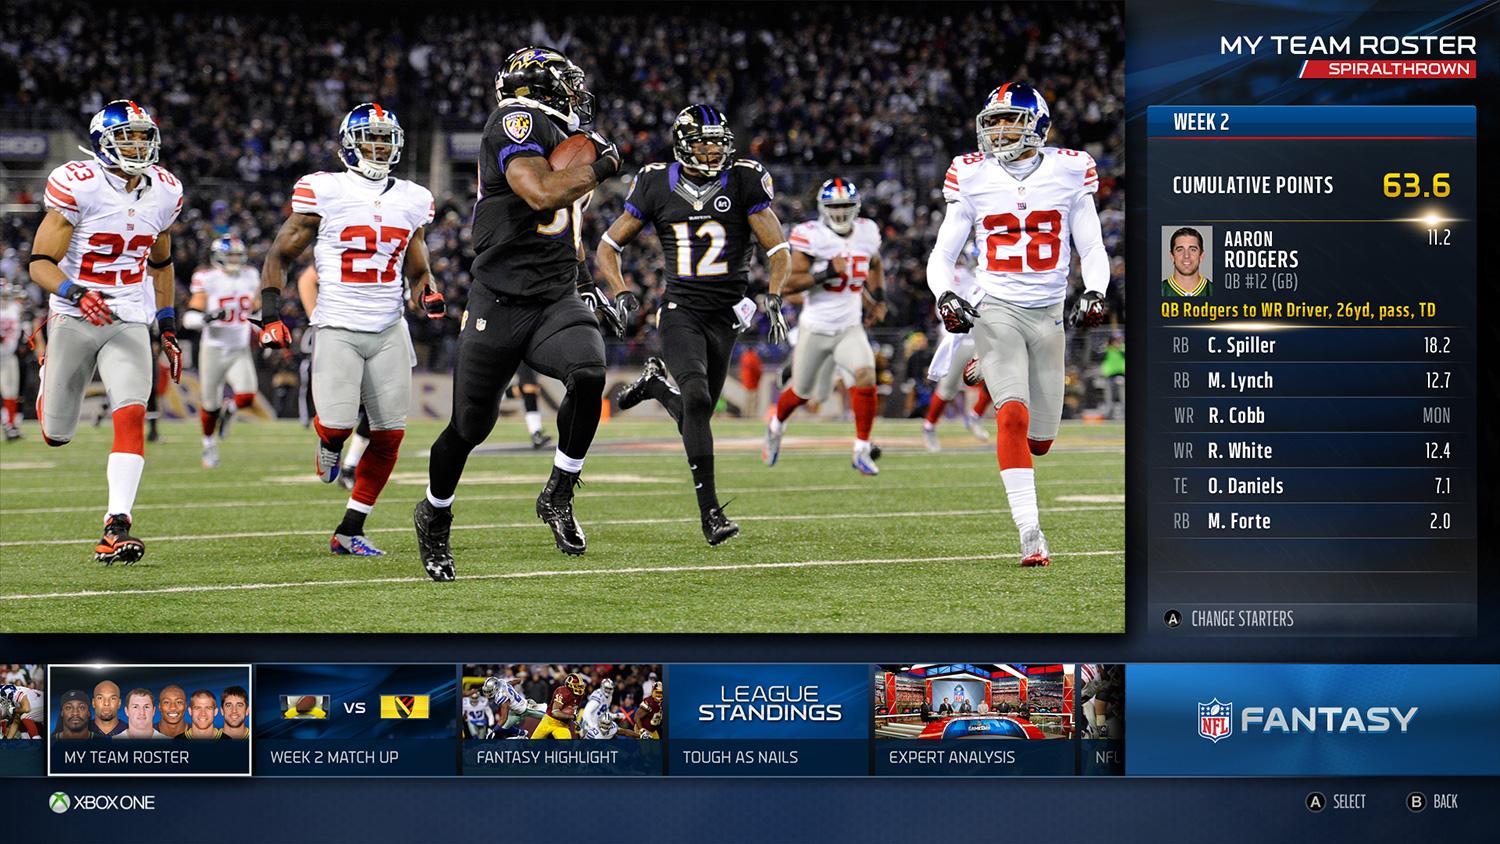 Xbox One rewards cord keepers with live NFL games Digital Trends